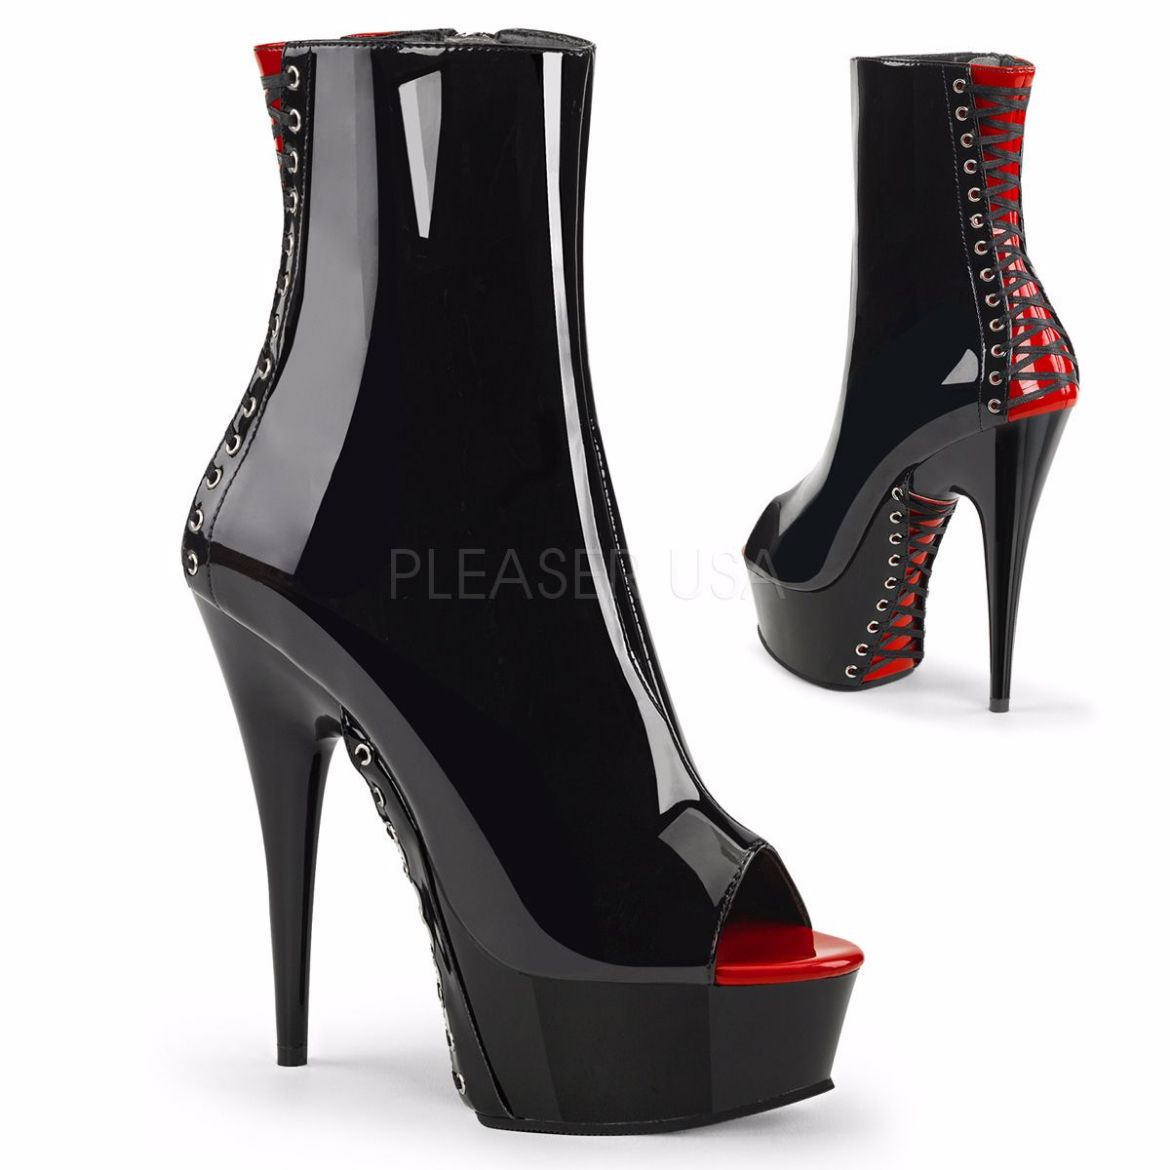 Product image of Pleaser Delight-1025 Black-Red Patent/Black, 6 inch (15.2 cm) Heel, 1 3/4 inch (4.4 cm) Platform Ankle Boot